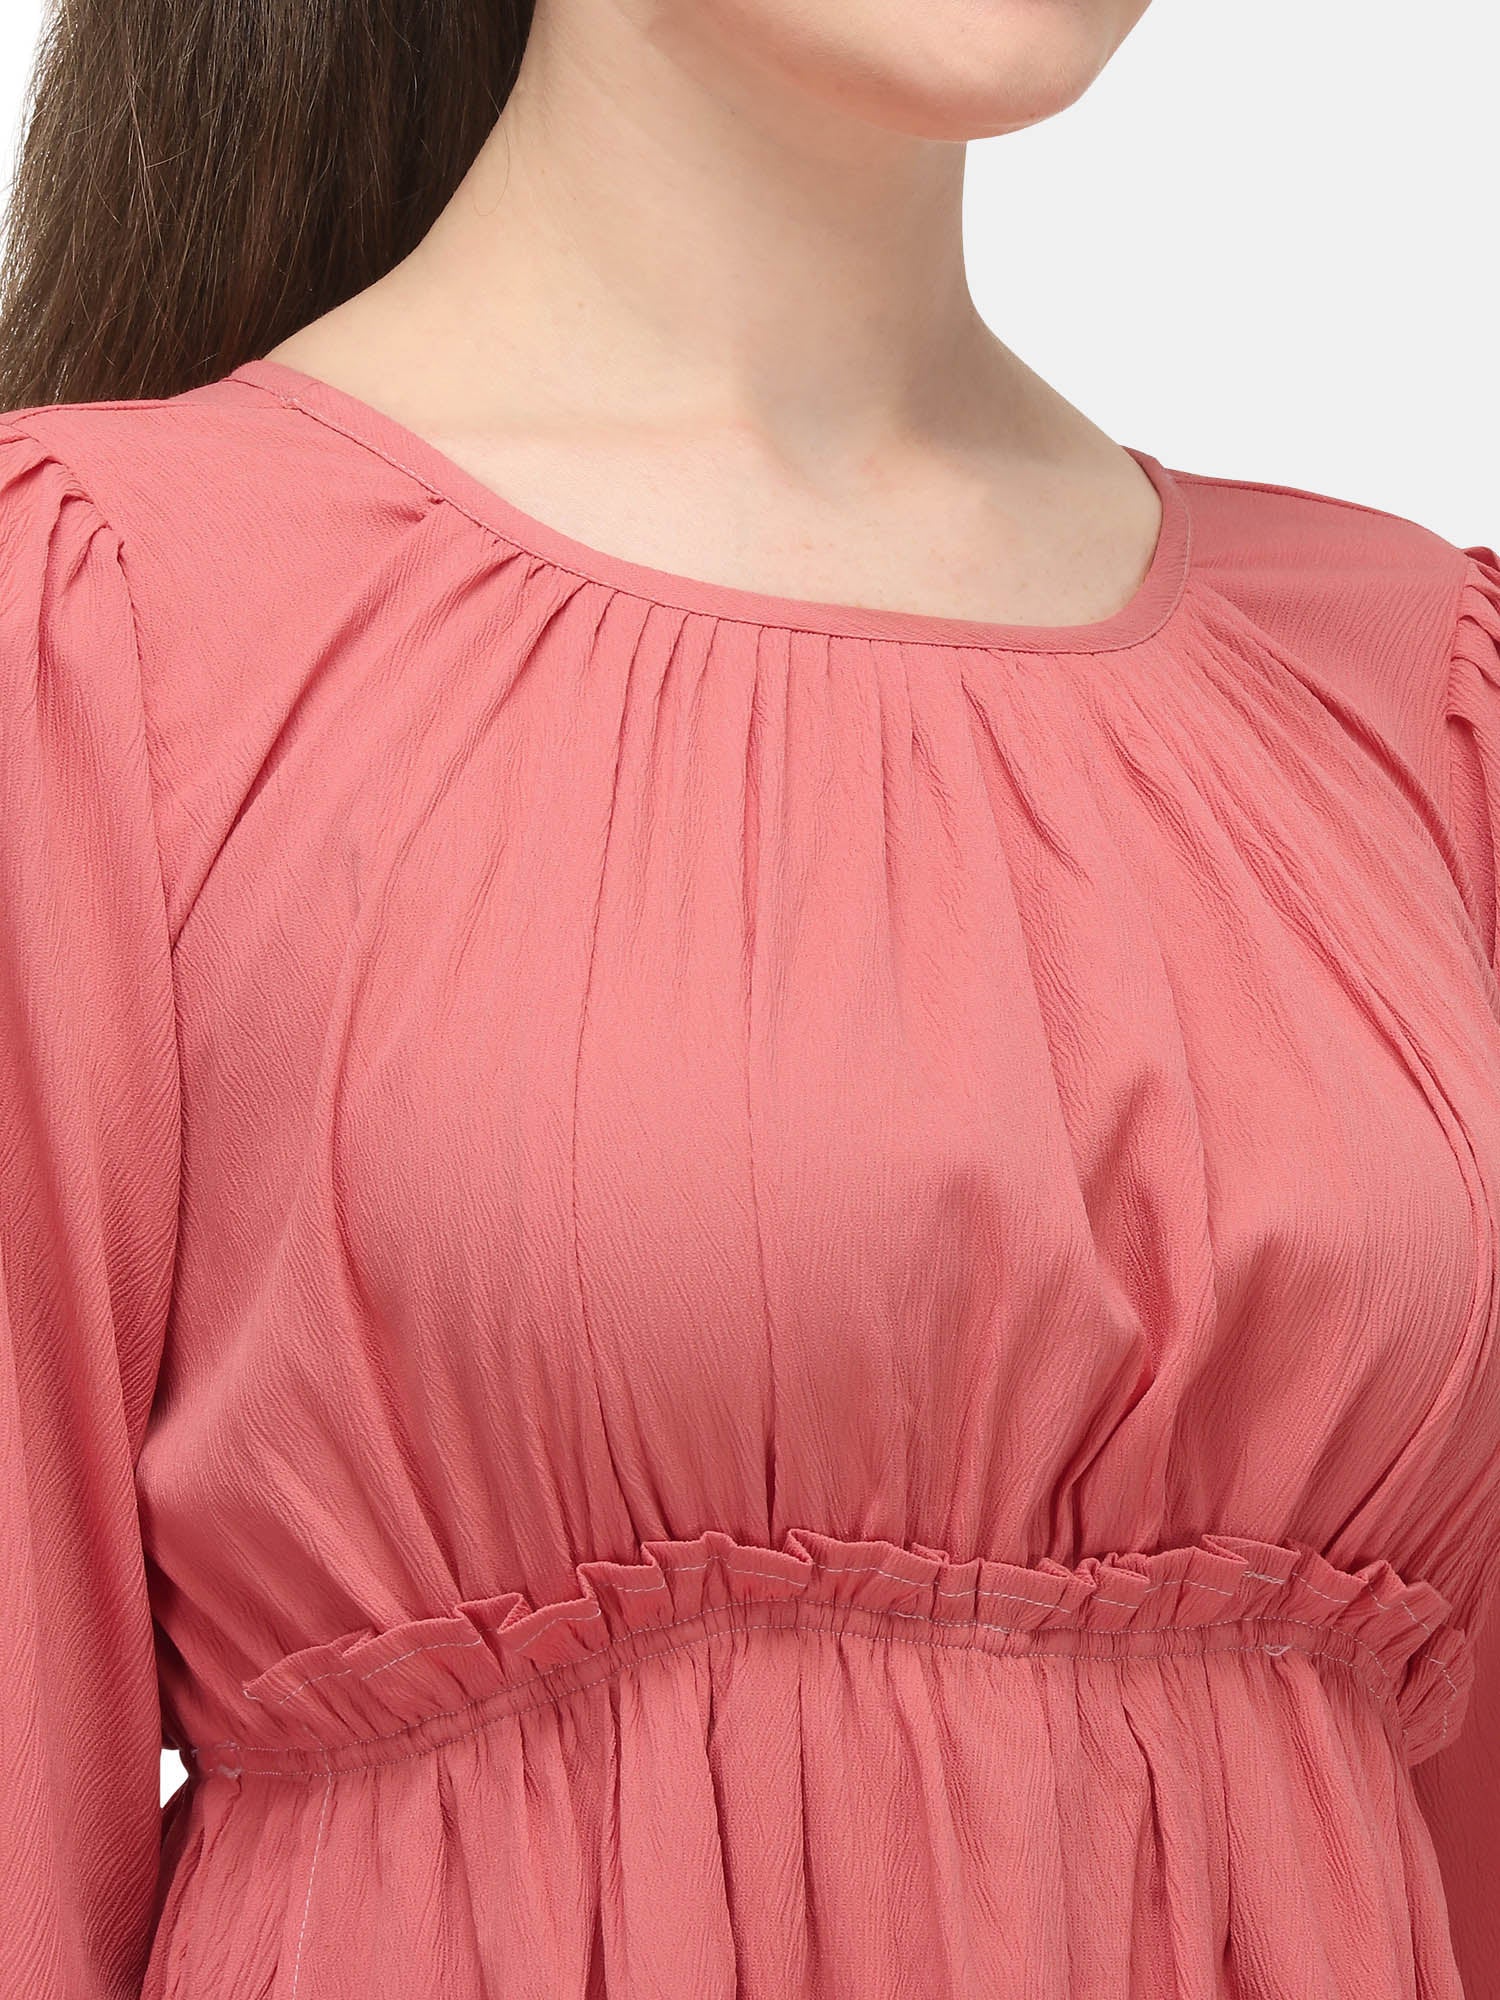 Women's Baby Pink Front Pleated Knee Length Tunic Dress - MESMORA FASHIONS